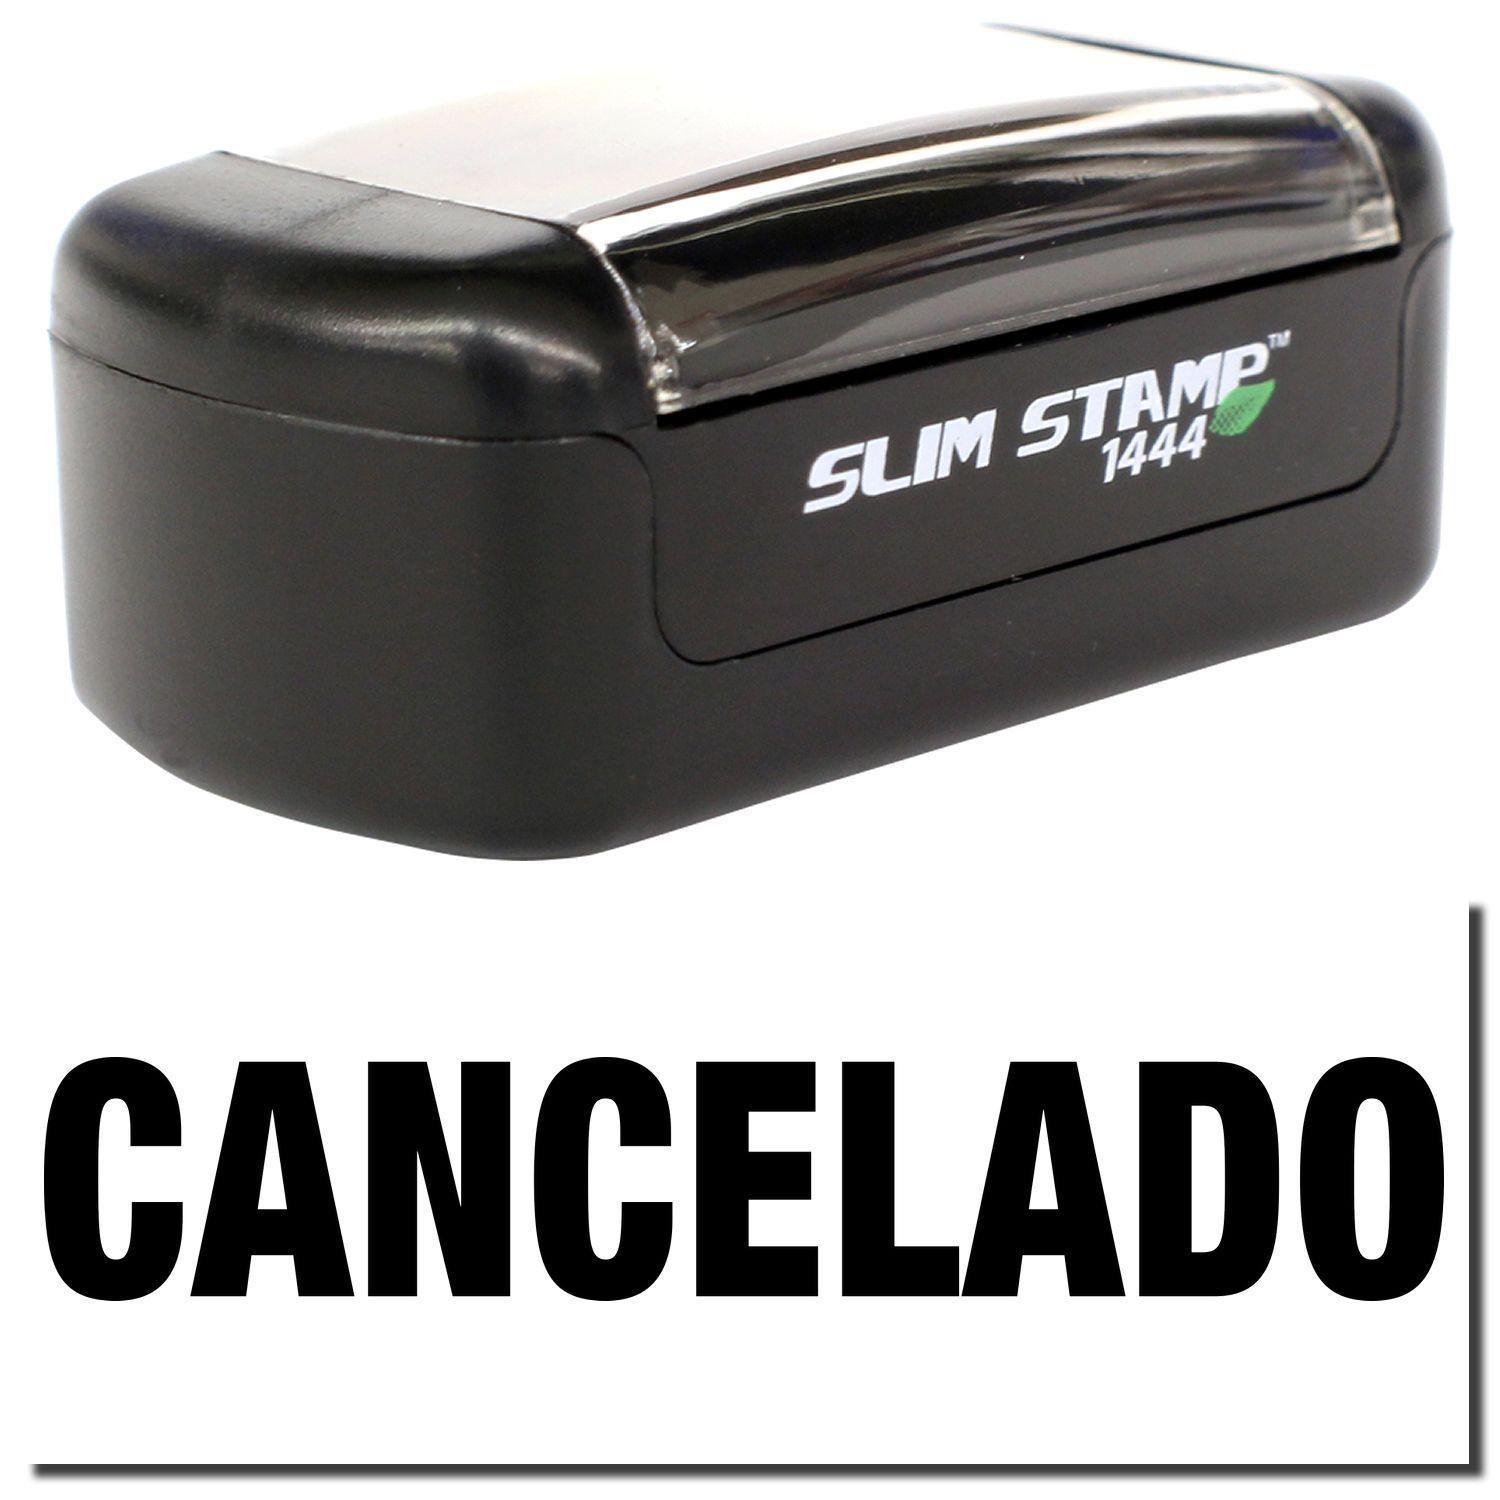 A stock office pre-inked stamp with a stamped image showing how the text "CANCELADO" is displayed after stamping.